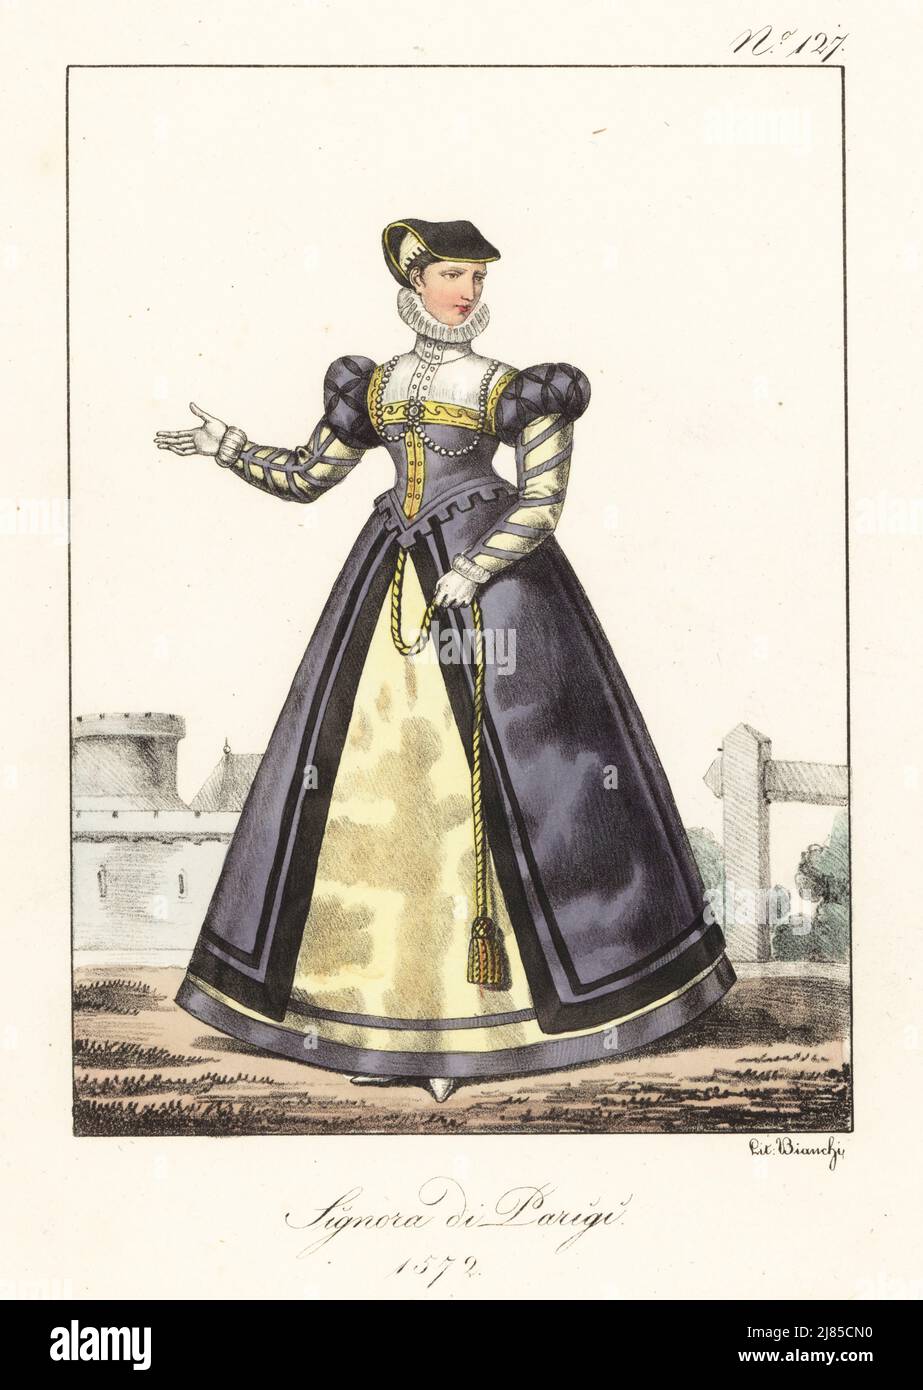 Costume of a lady of Paris, 1572. In headdress, ruff collar, gown with puff shoulders, embroidered bodice, silk underskirt. Dame de Paris. Handcoloured lithograph by Lorenzo Bianchi after Hippolyte Lecomte from Costumi civili e militari della monarchia francese dal 1200 al 1820, Naples, 1825. Italian edition of Lecomte’s Civilian and military costumes of the French monarchy from 1200 to 1820. Stock Photo